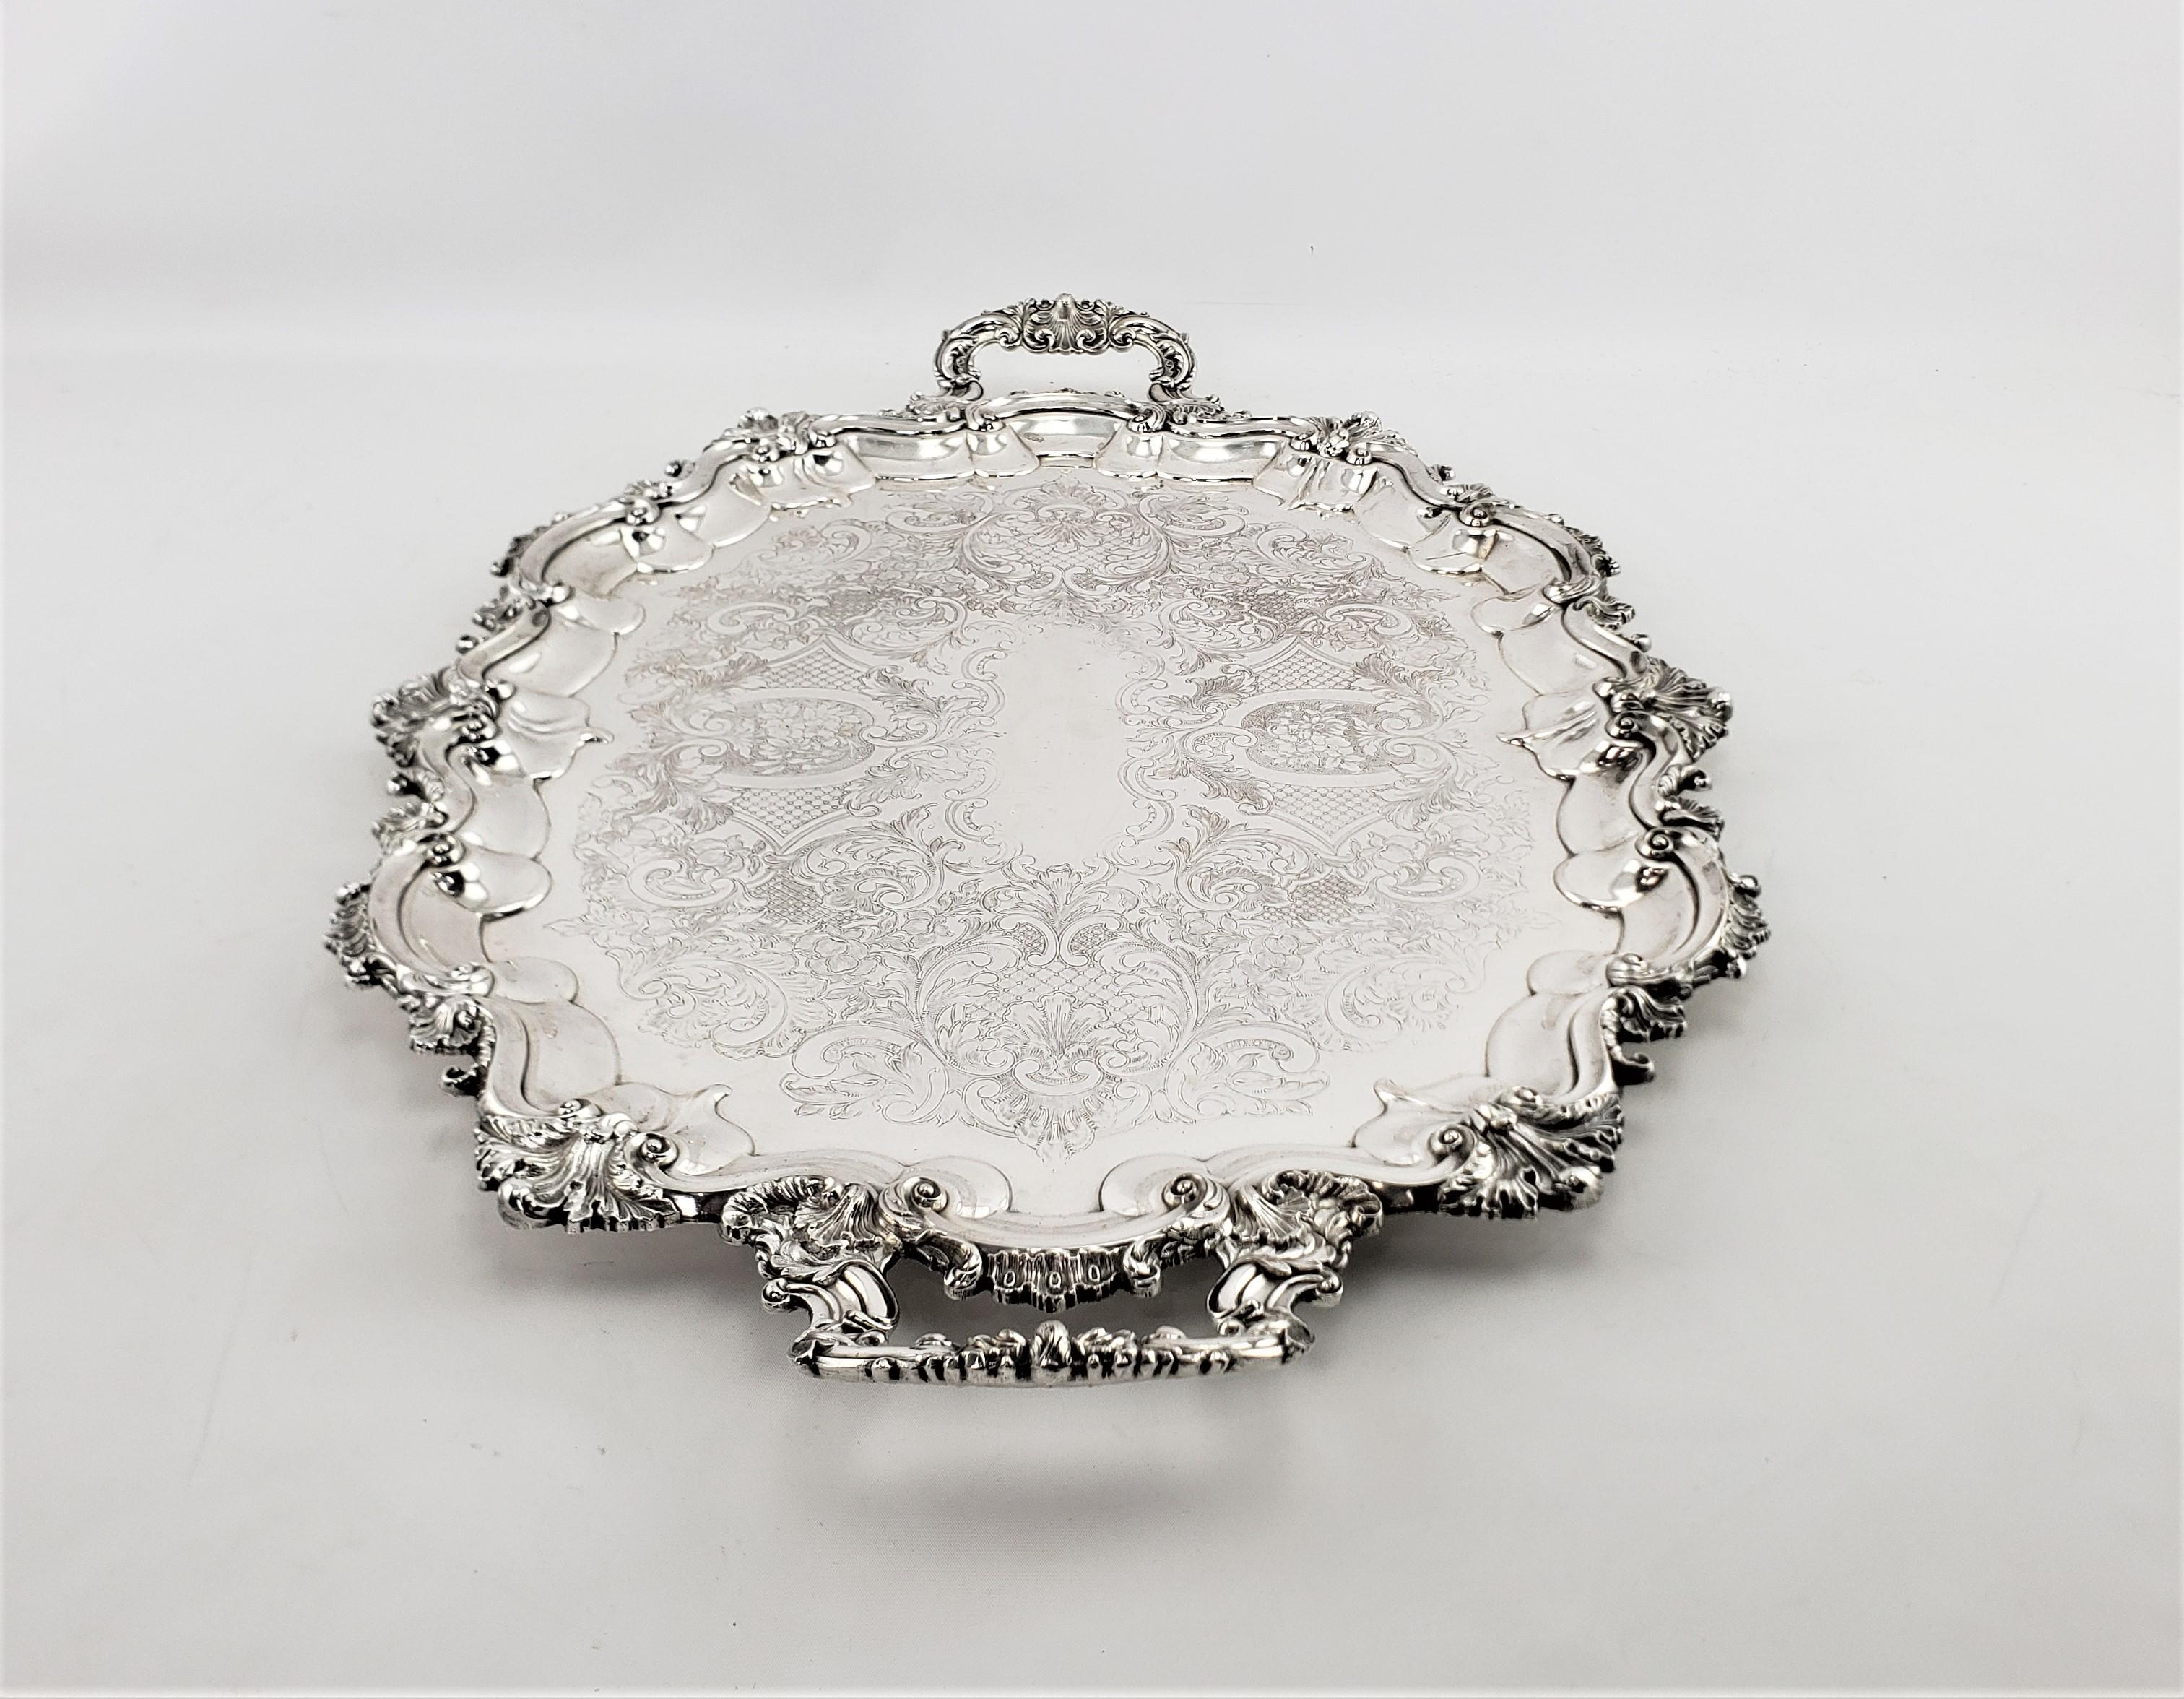 English Large Antique Oval Silver Plated Serving Tray with Ornate Floral Decoration